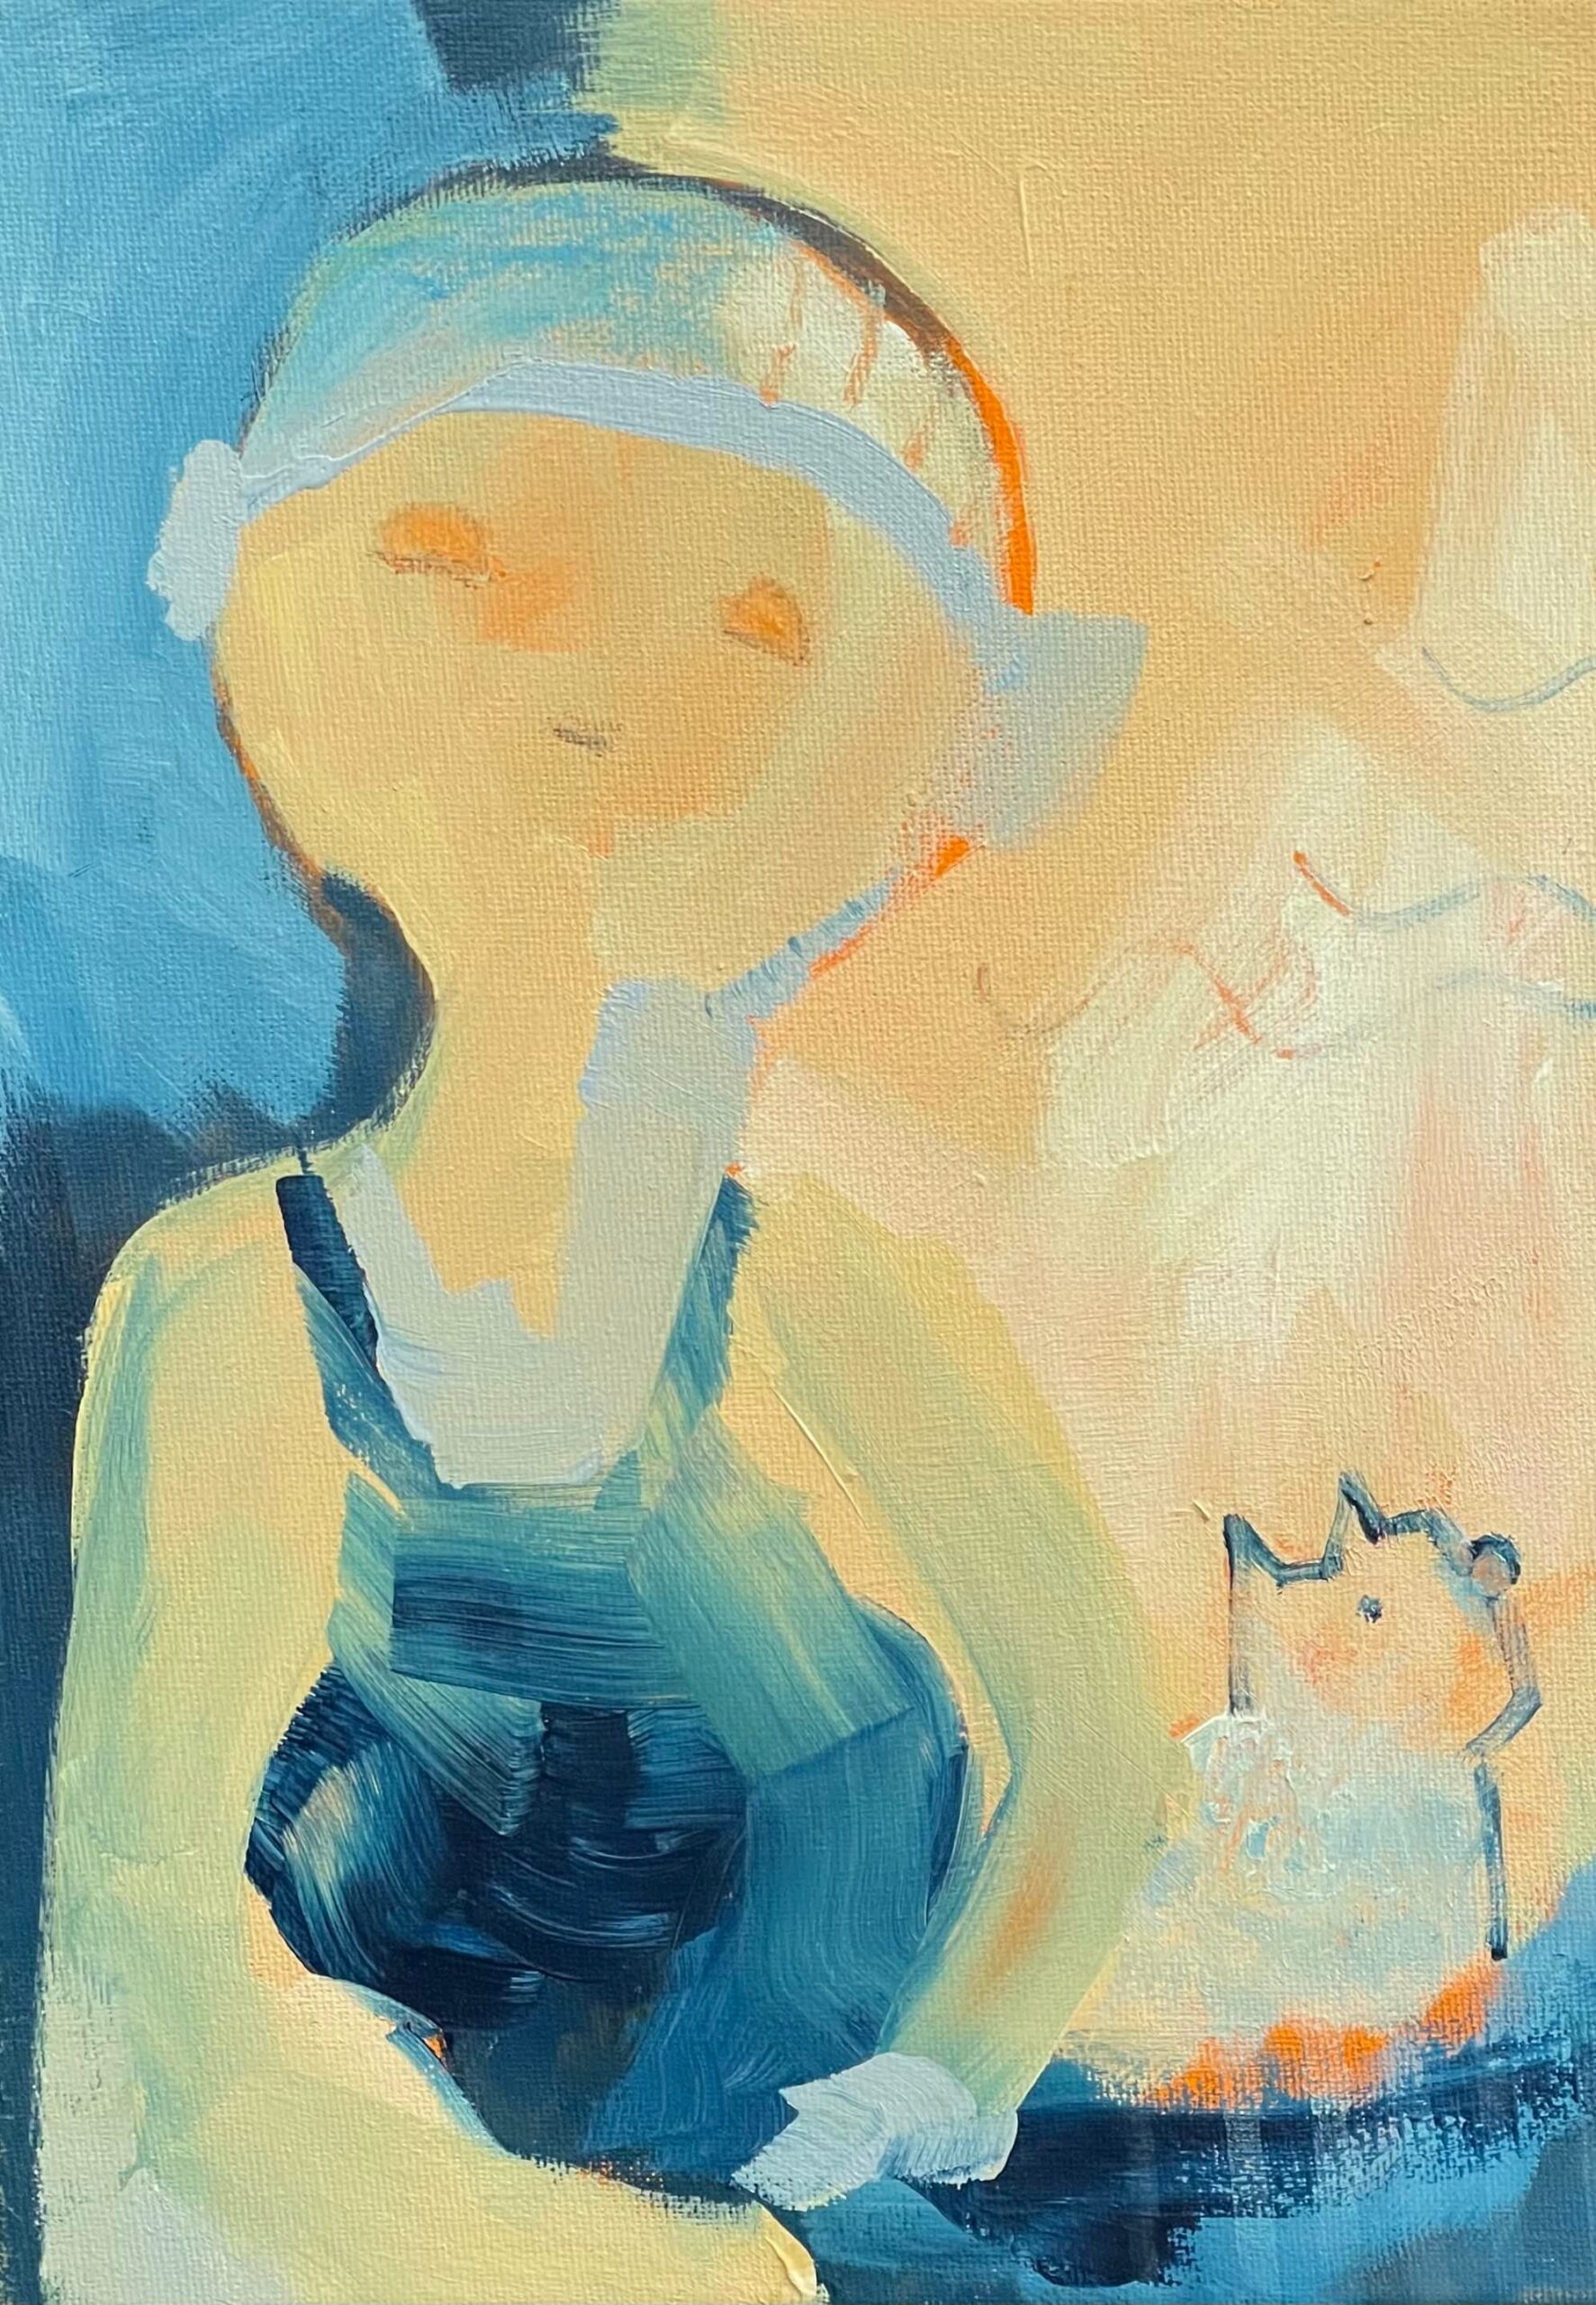 painting of figure and dog at the beach in blue and orange